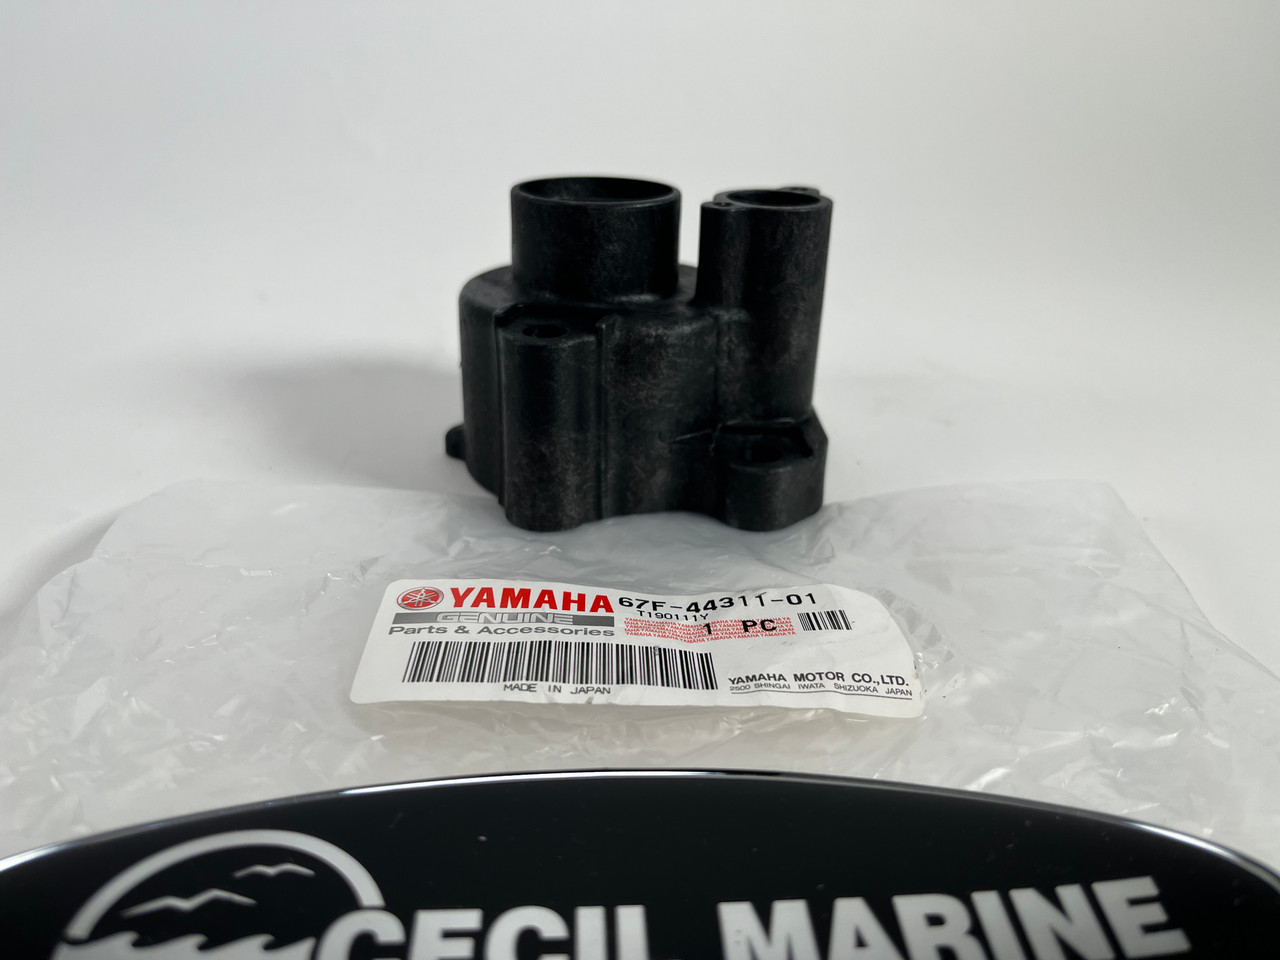 $10.99* GENUINE YAMAHA no tax* HOUSING, WATER PUMP 67F-44311-01-00 *In Stock & Ready To Ship